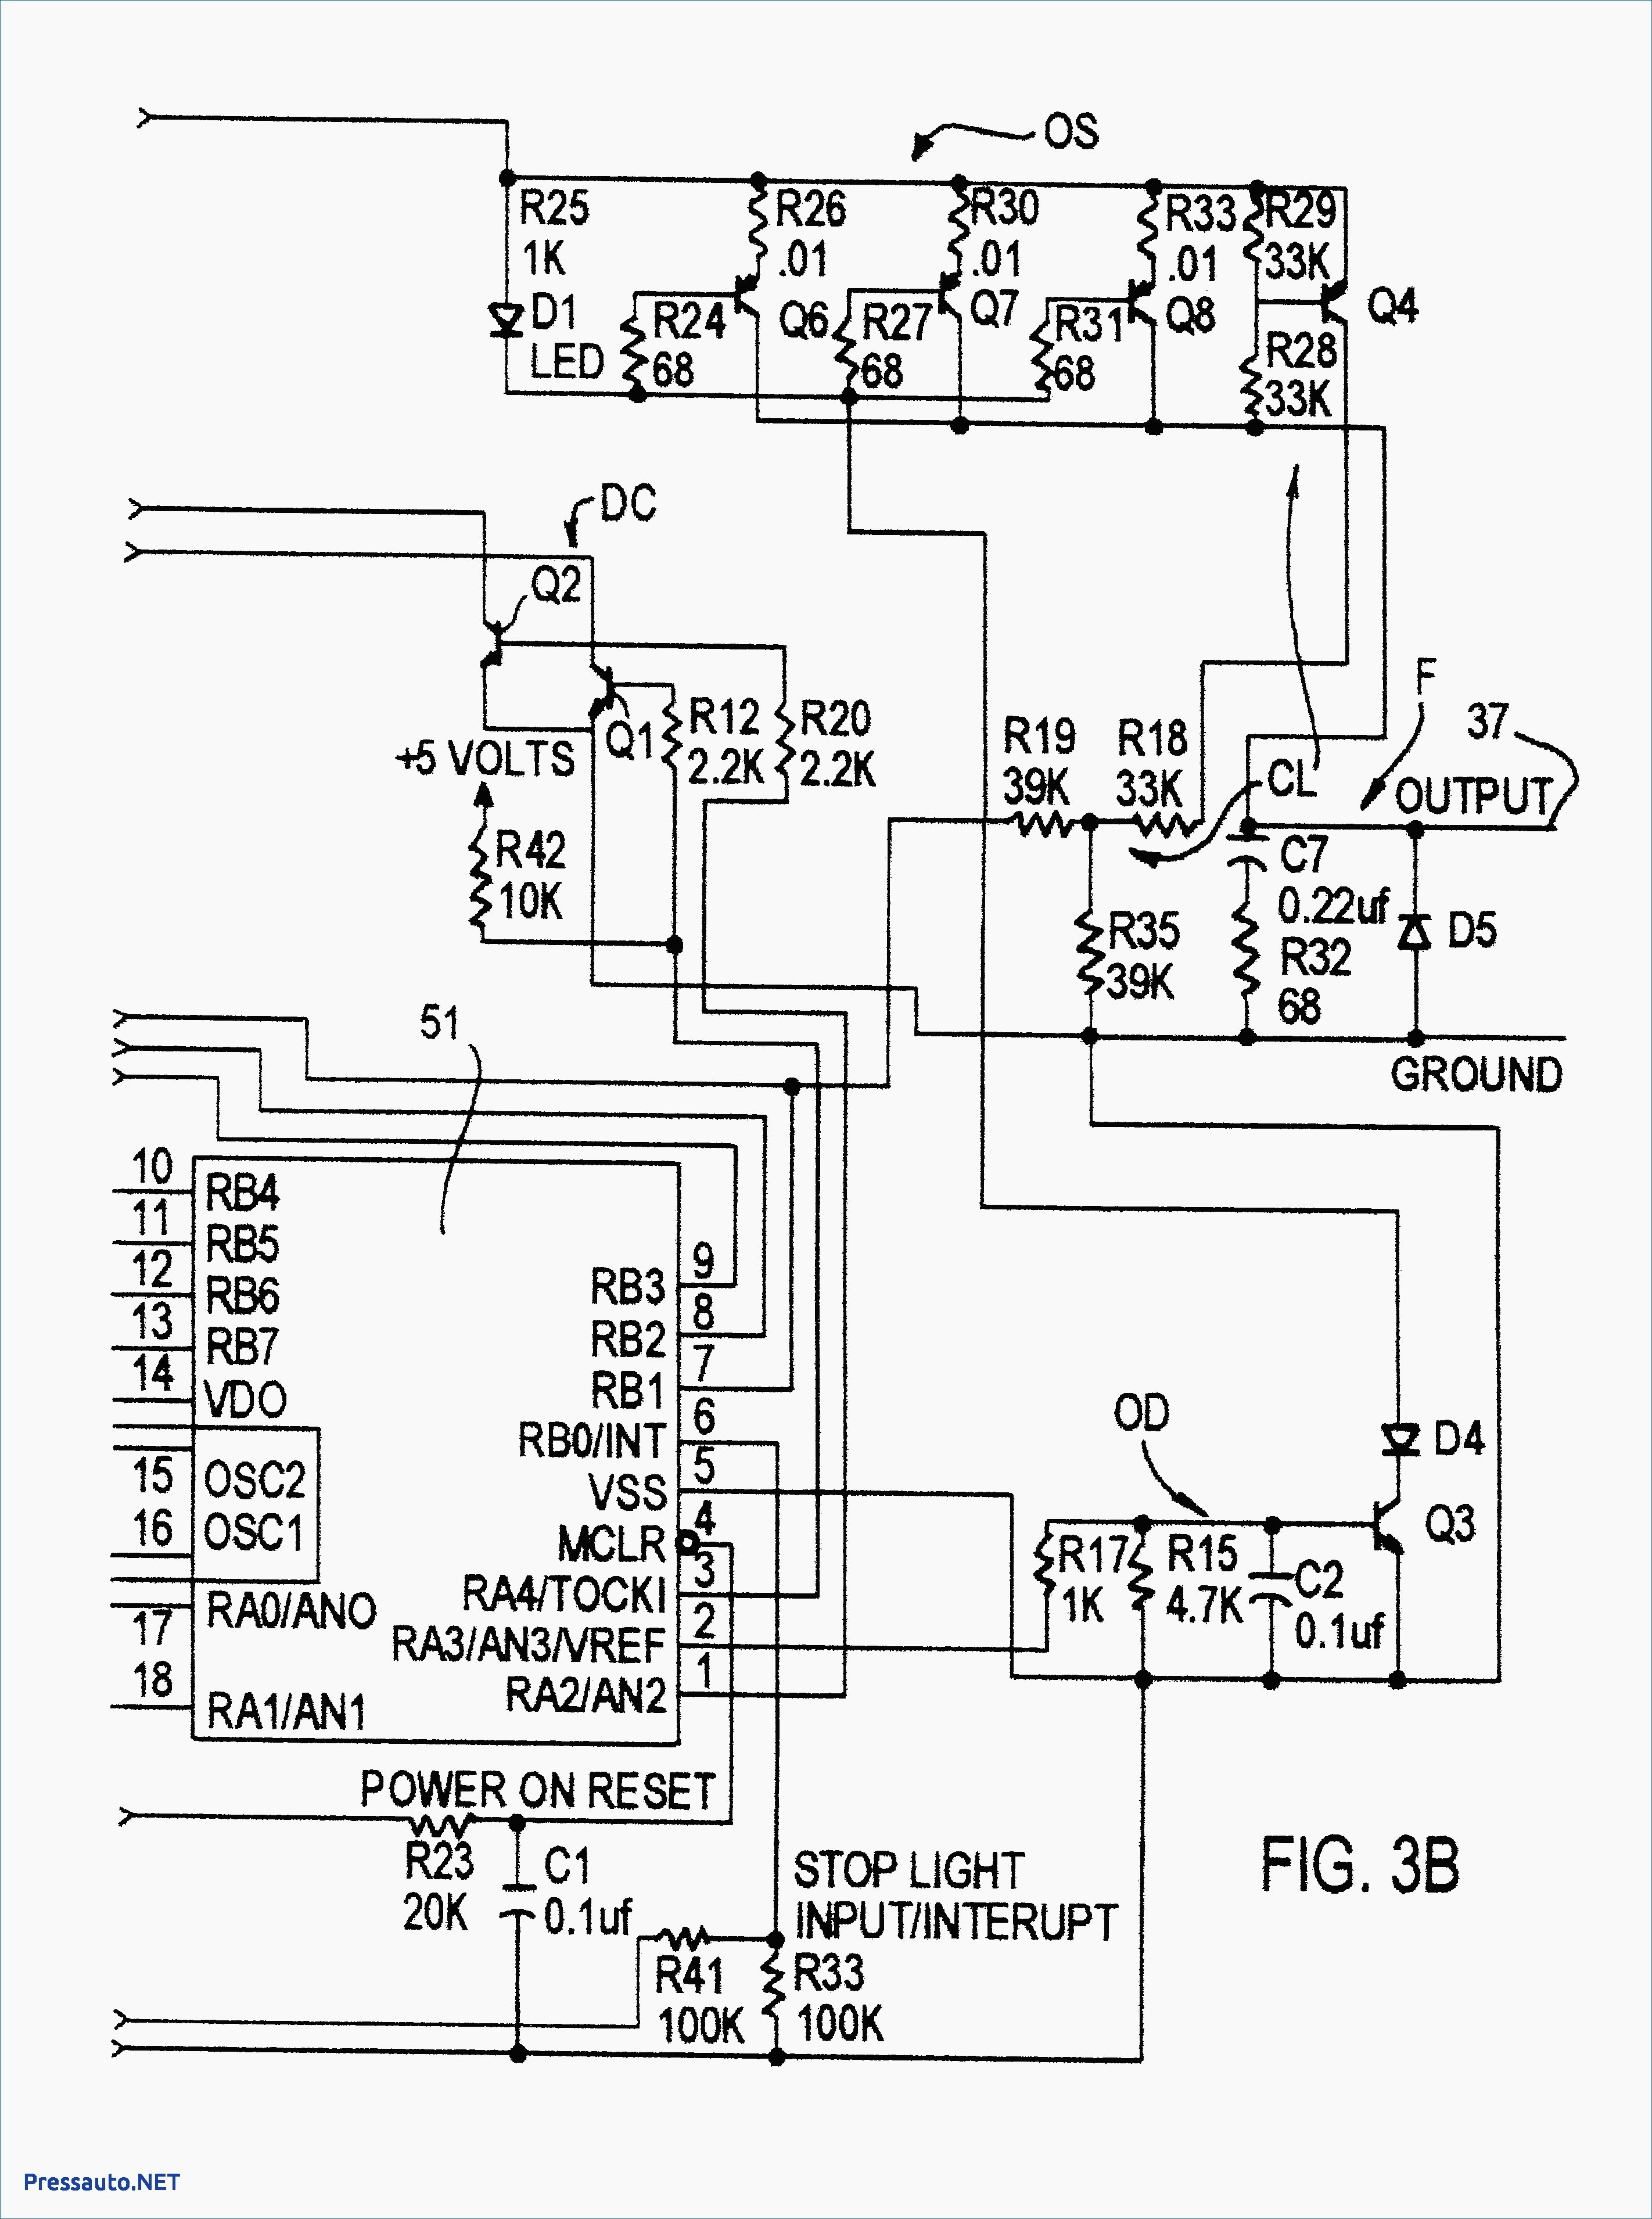 1997 Chevy Expres Wiring Diagram